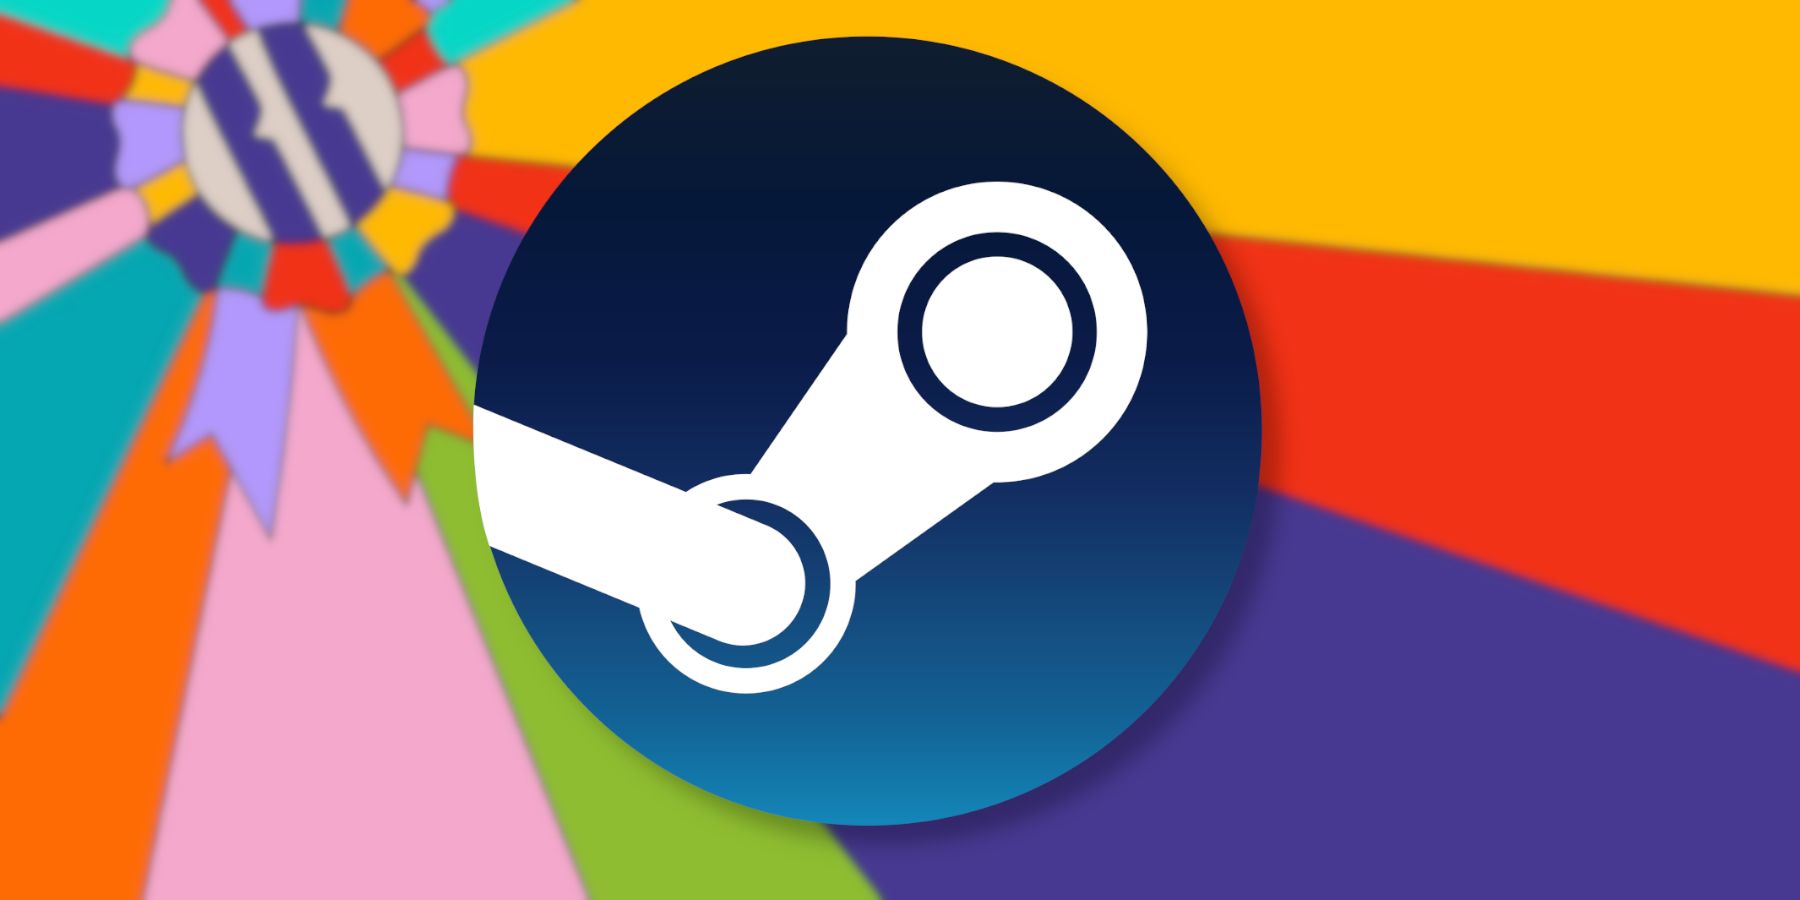 A brightly-colored image with the Steam logo in the foreground.